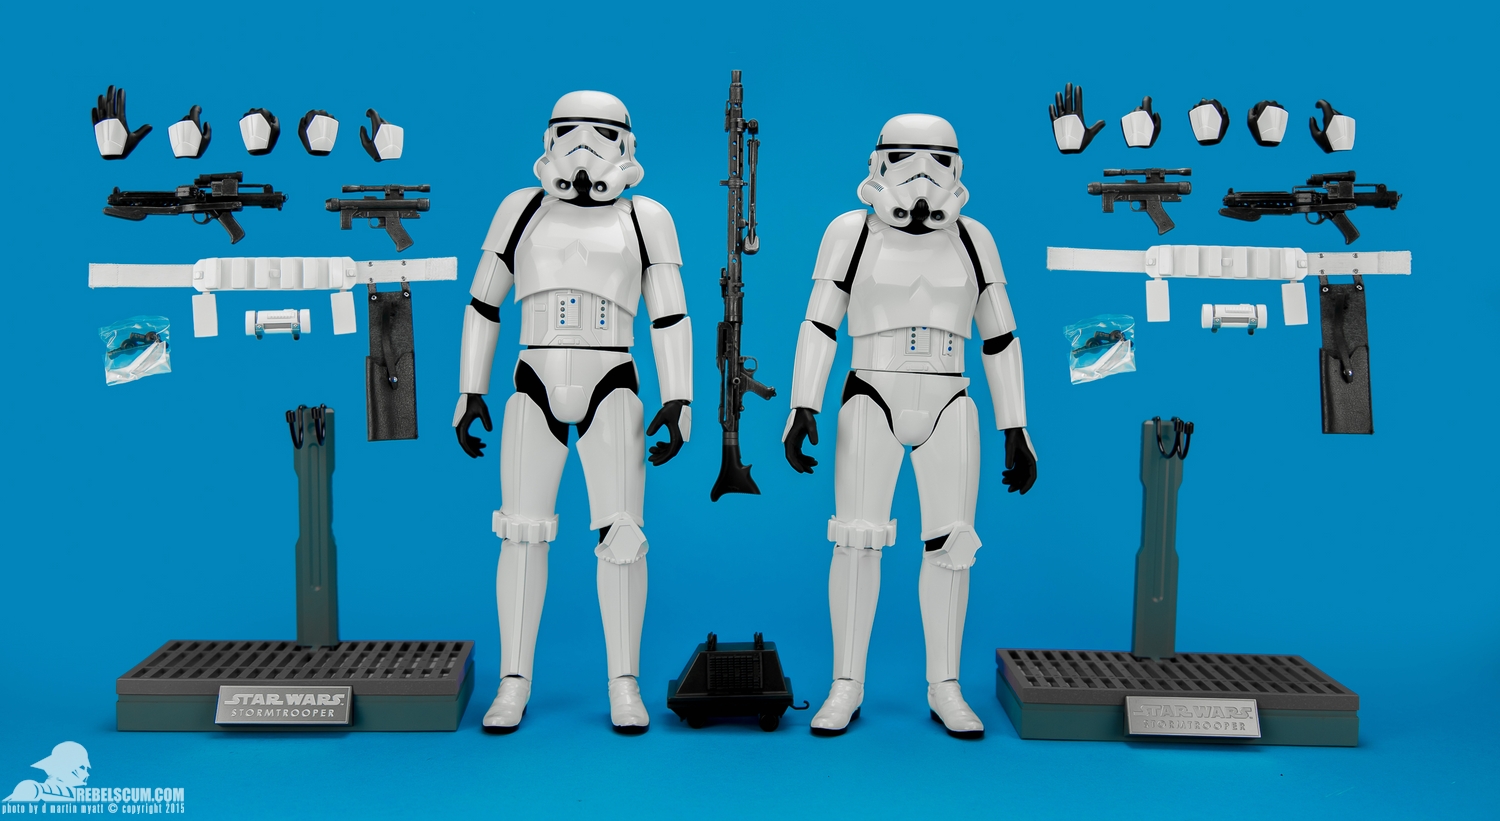 MMS268-Stormtroopers-Hot-Toys-Star-Wars-Two-Pack-024.jpg